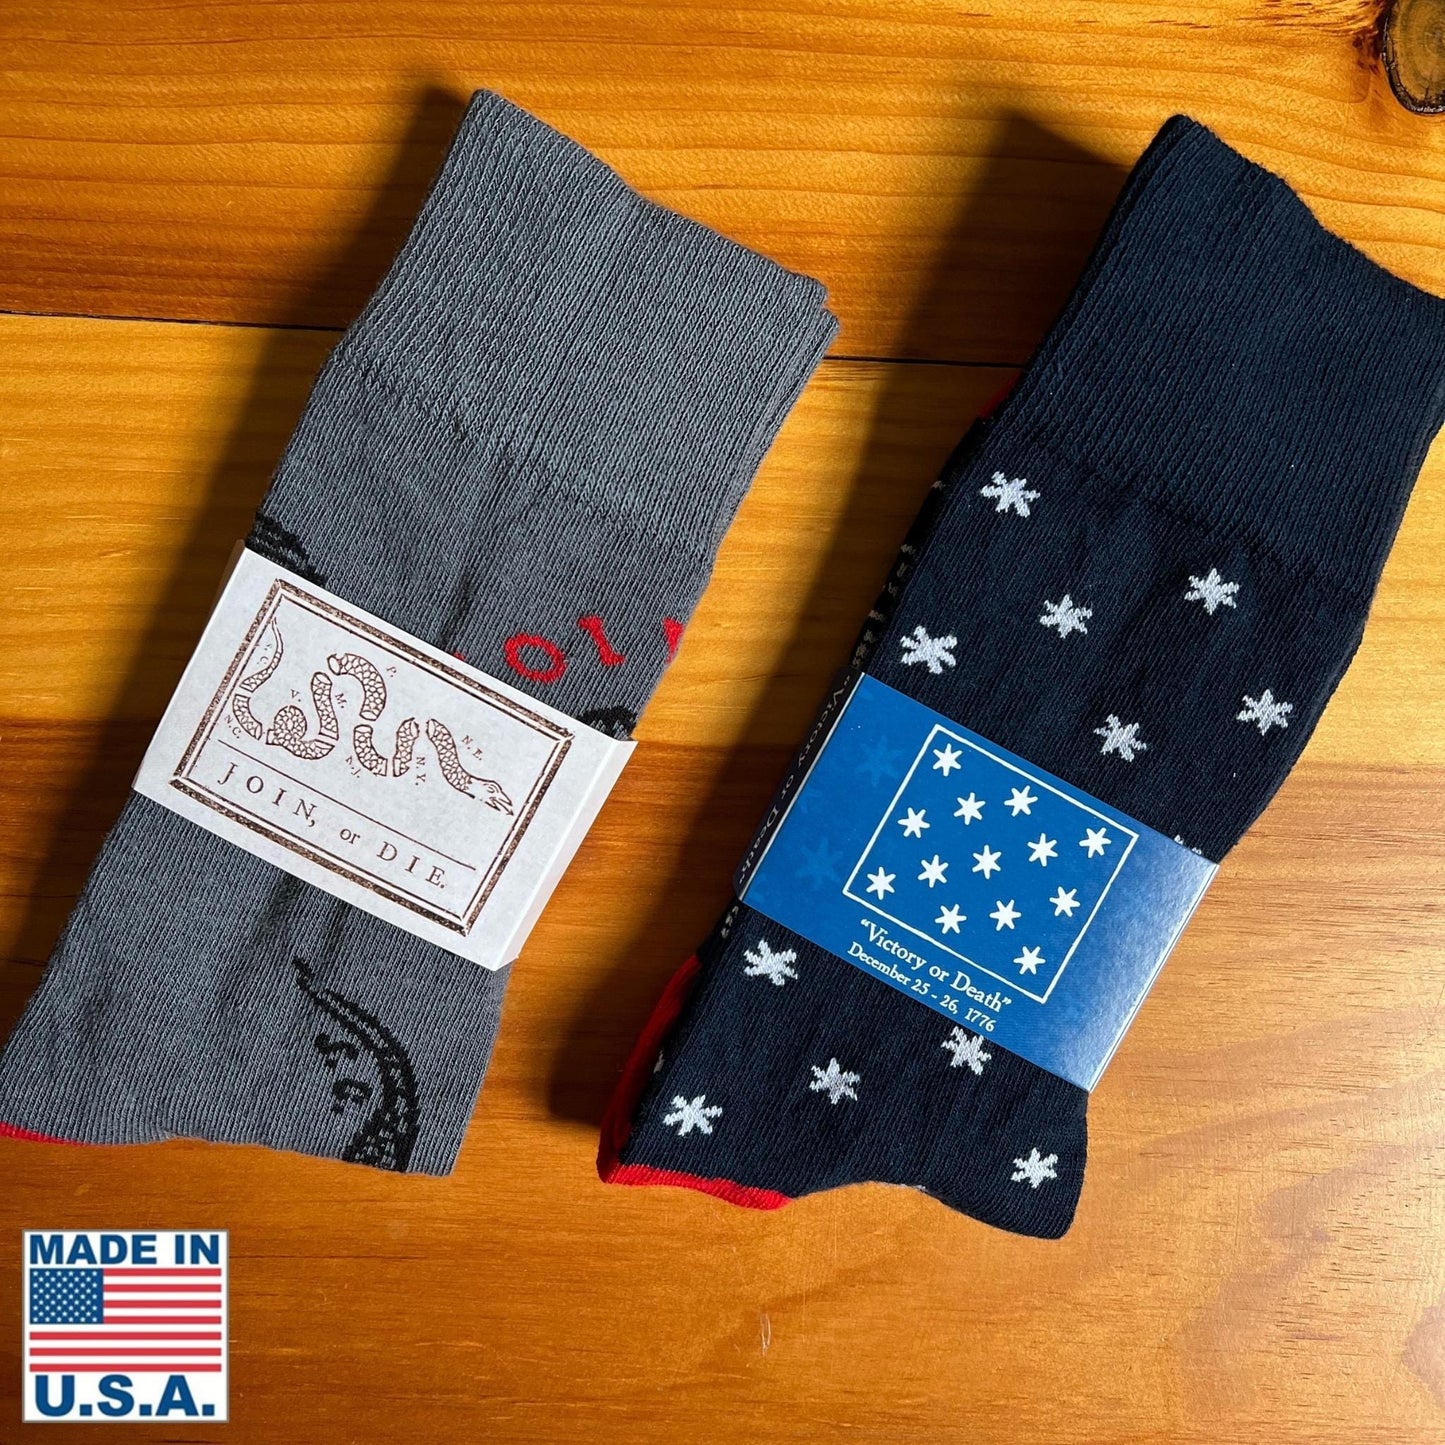 Bundle of "Join or Die" Socks and "Victory or Death" Socks — Made in USA from The HIstory List store